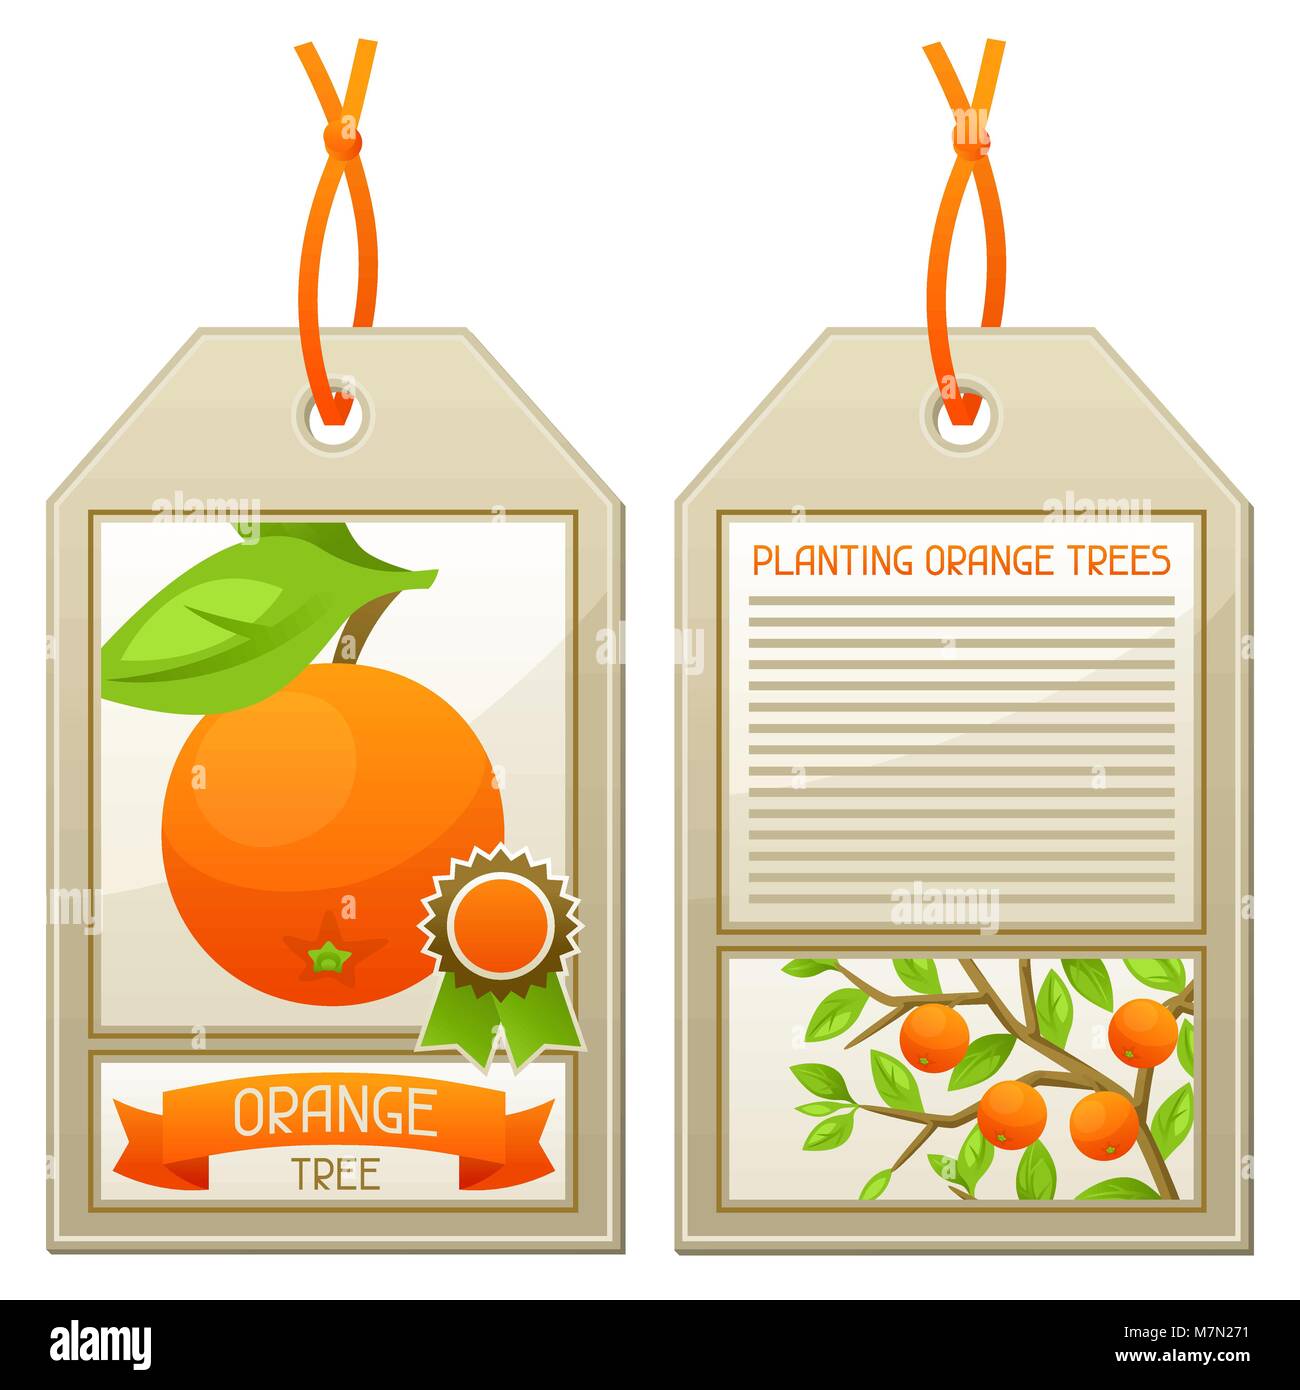 Sale tag of seedlings orange trees. Instructions for planting tree Stock Vector